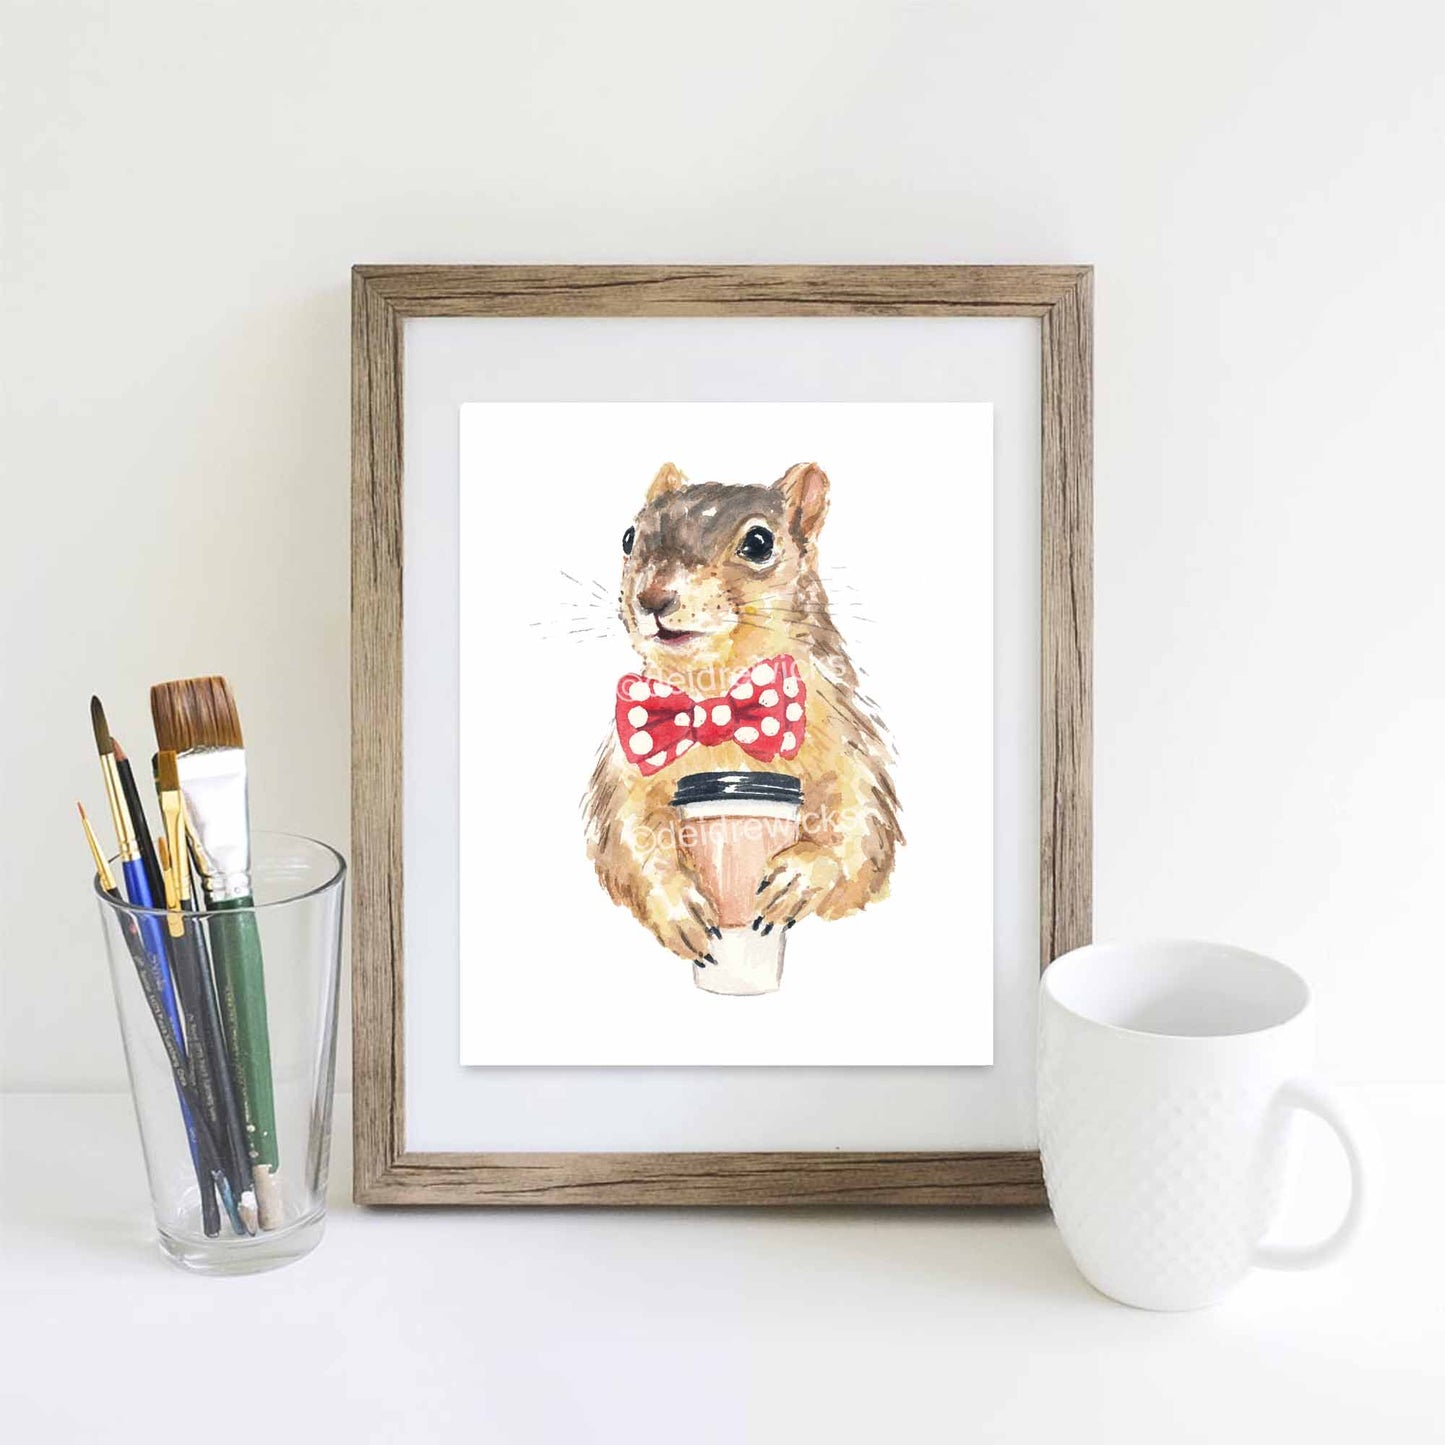 Framed example of a coffee squirrel watercolour print by Deidre Wicks. Comes in 3 sizes and is archival